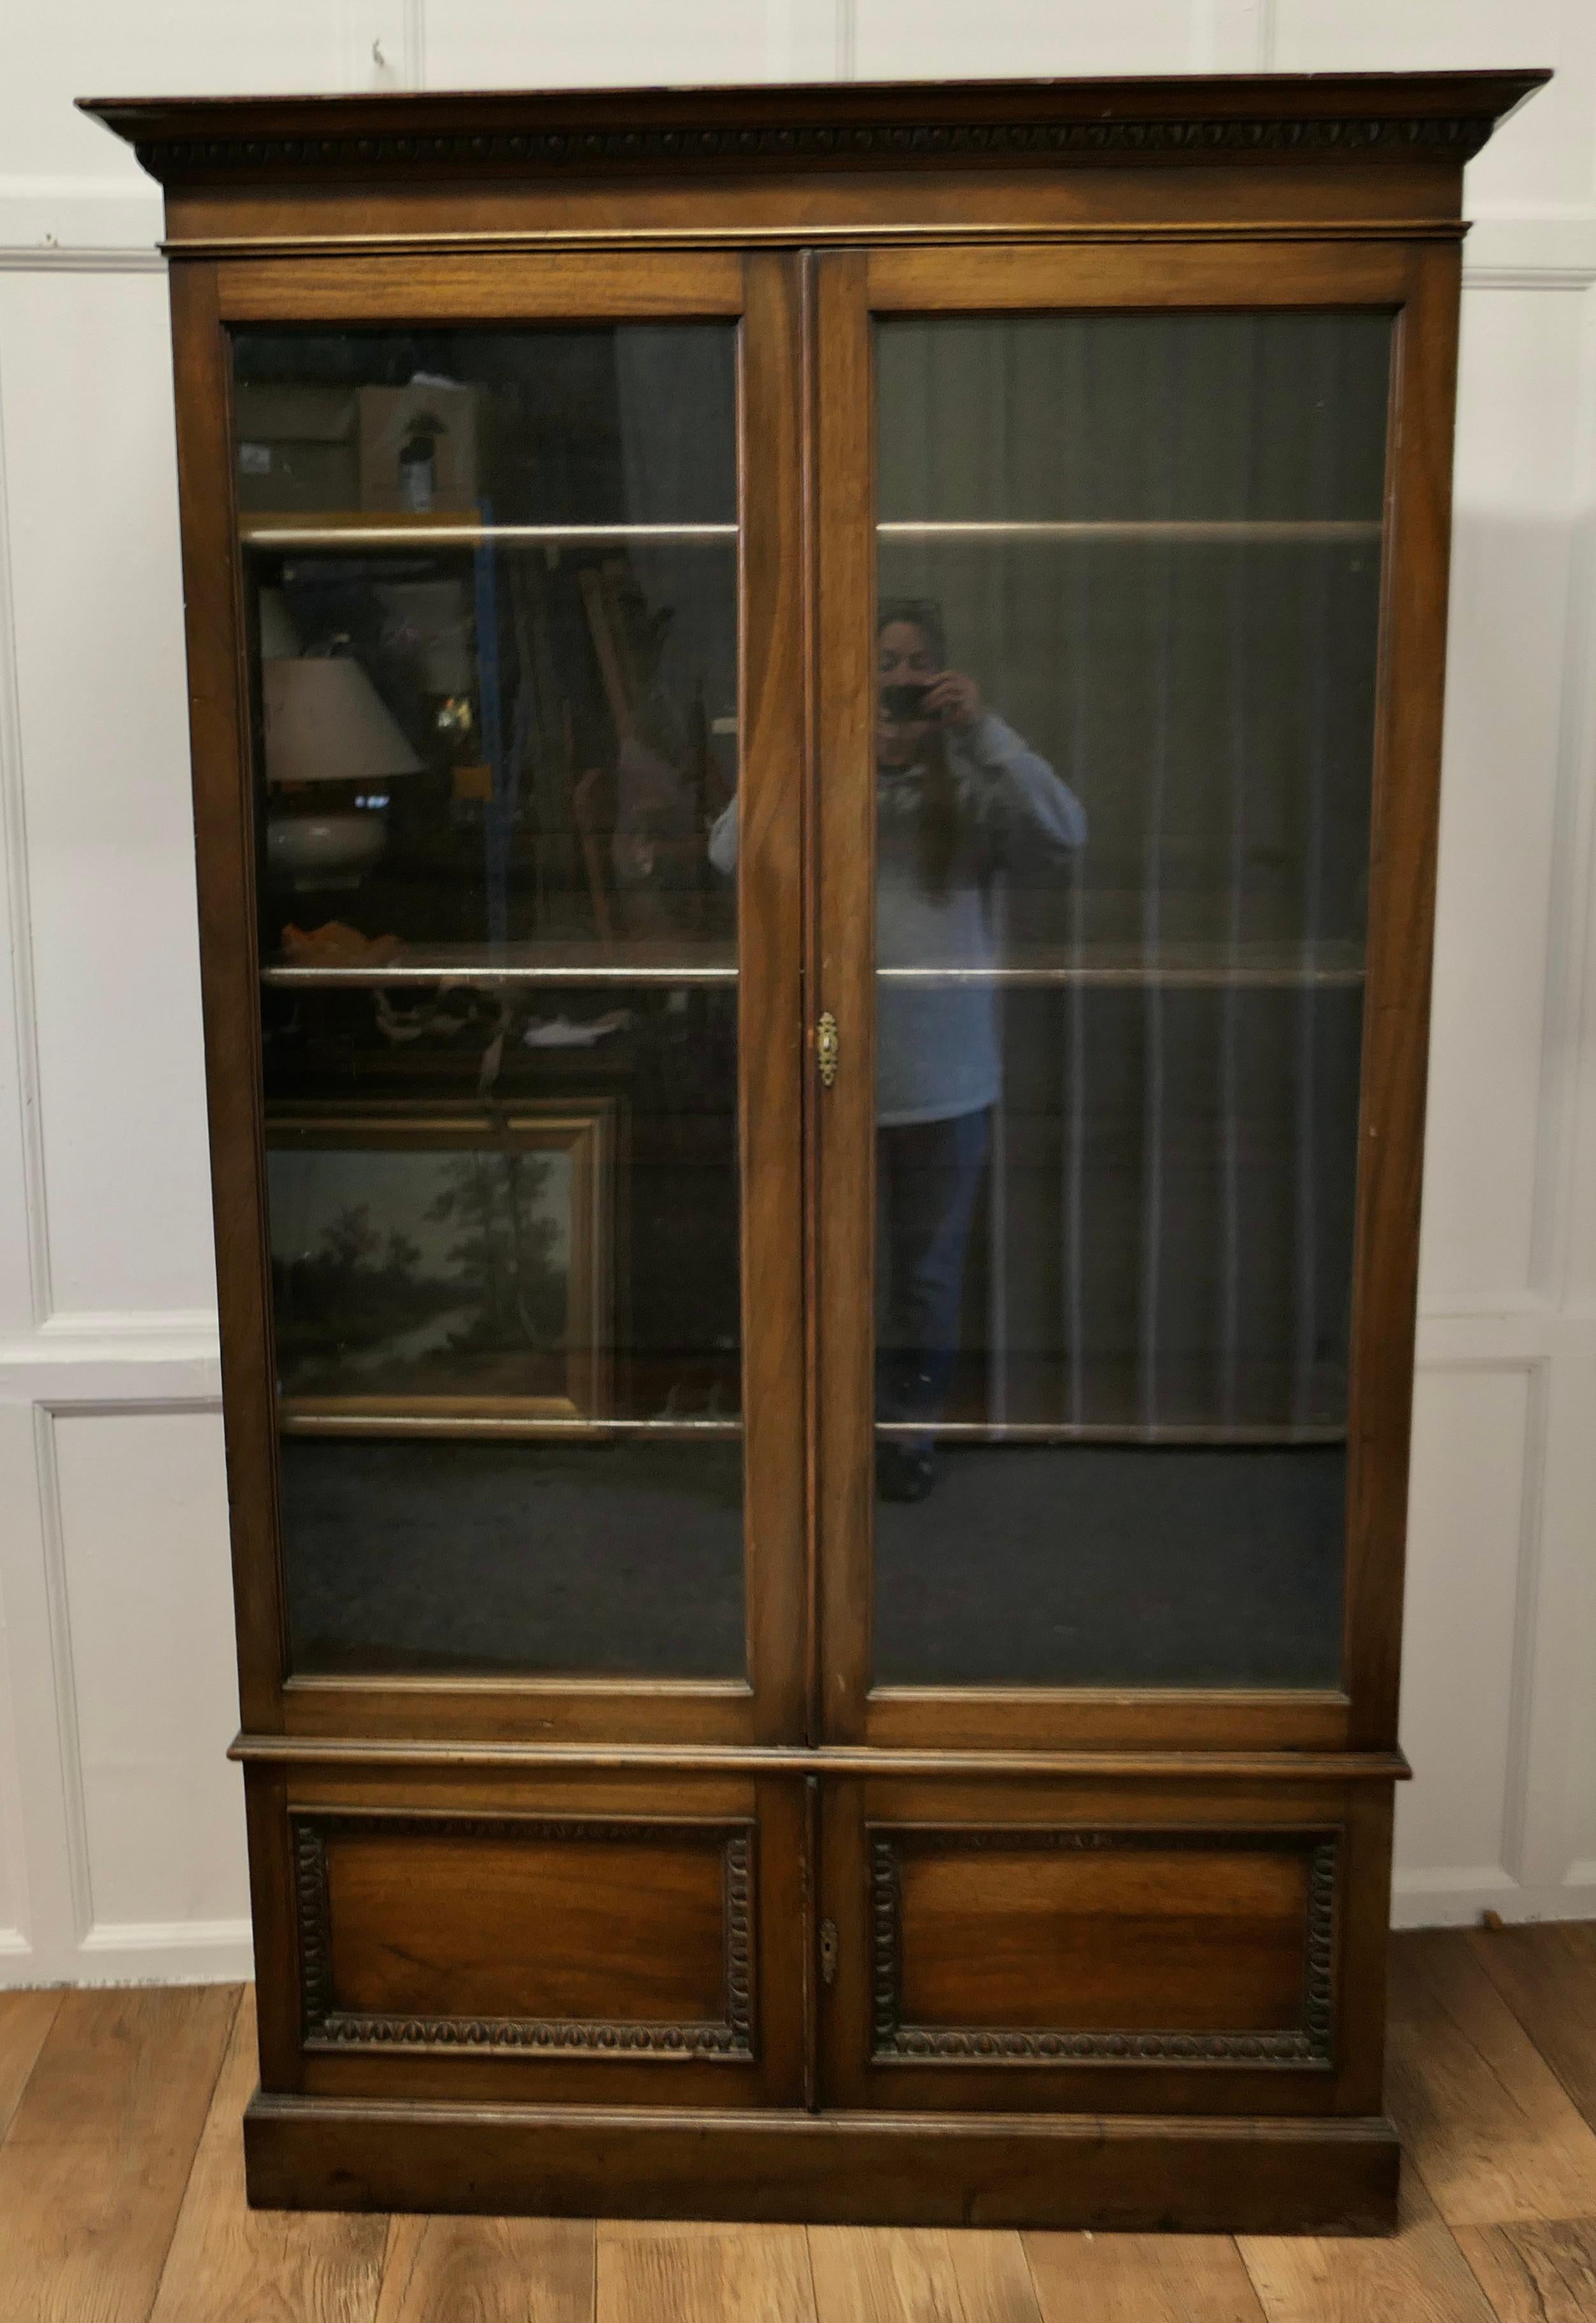 19th century Tall Glazed Bookcase, with Cupboard Under

This is a very useful piece, it has 2 glazed doors above smaller panelled doors
The top cabinet has 3 adjustable shelves to the interior, the bookcase is in good condition, we do not have